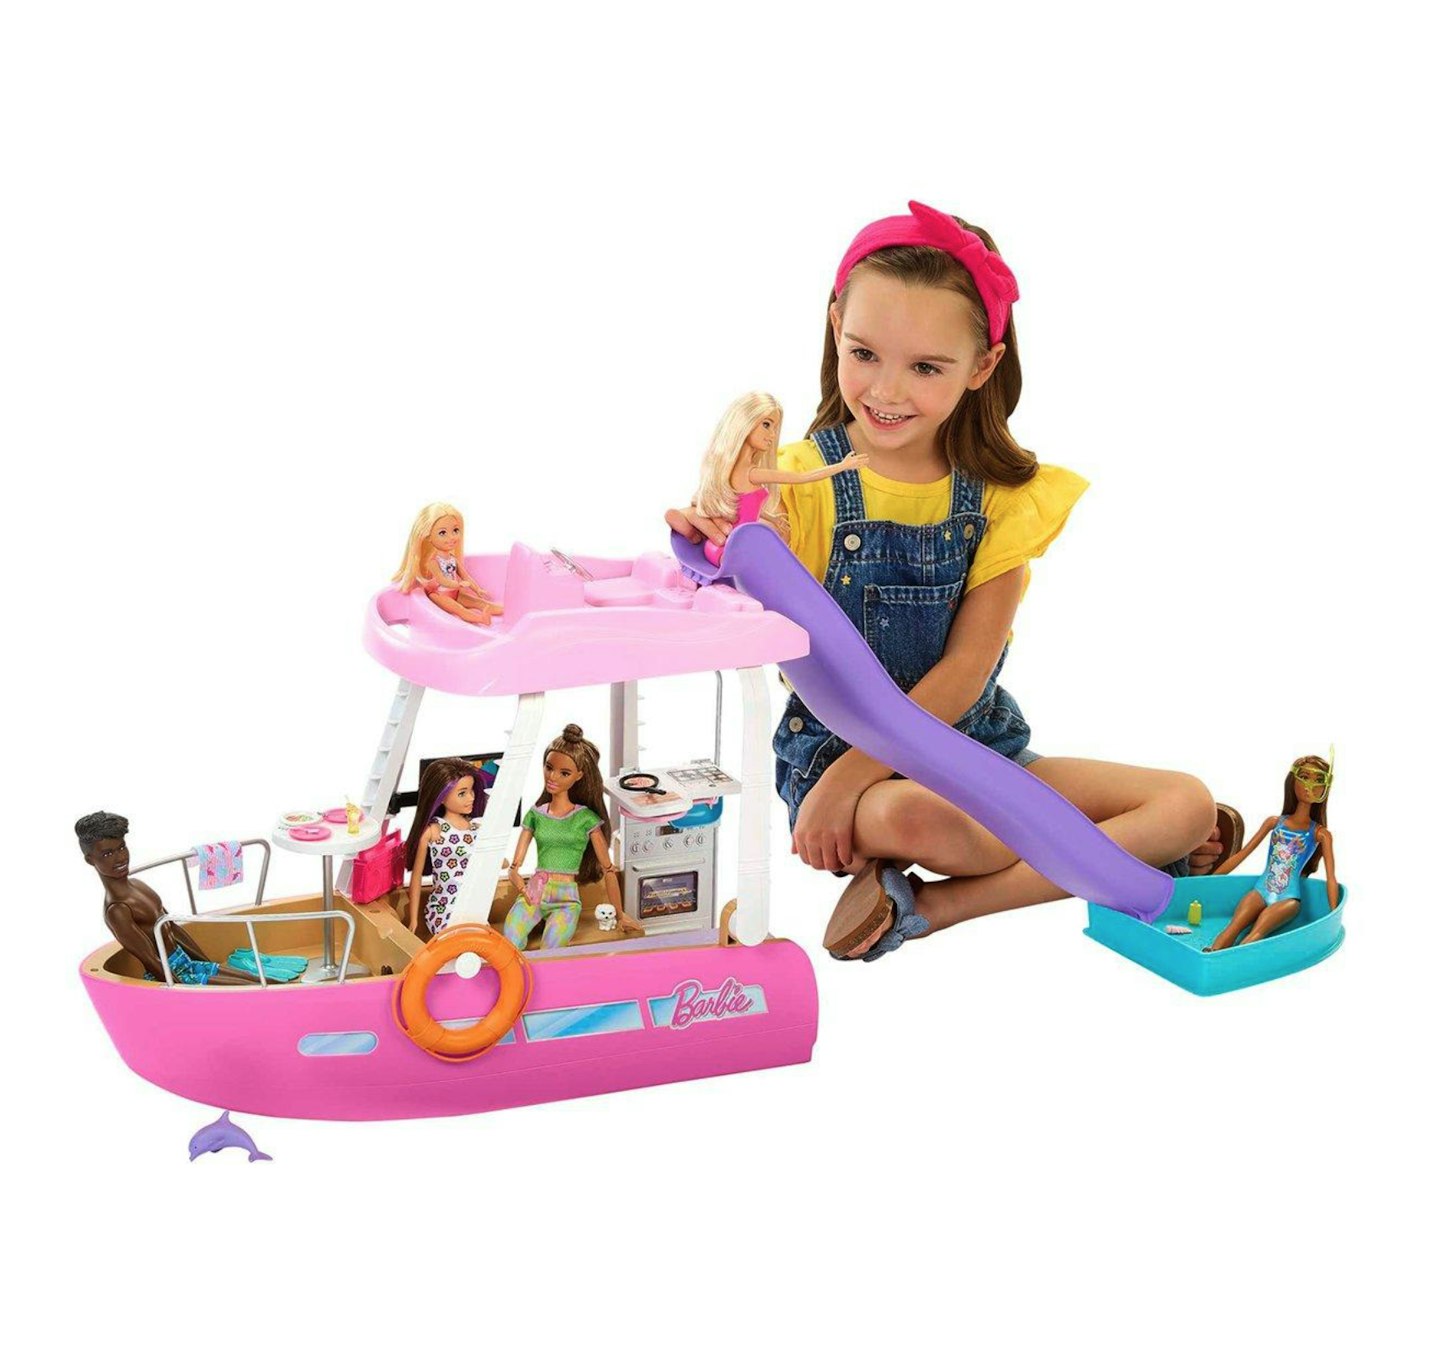 Barbie Dream Boat Playset with Pool, Slide & Accessories